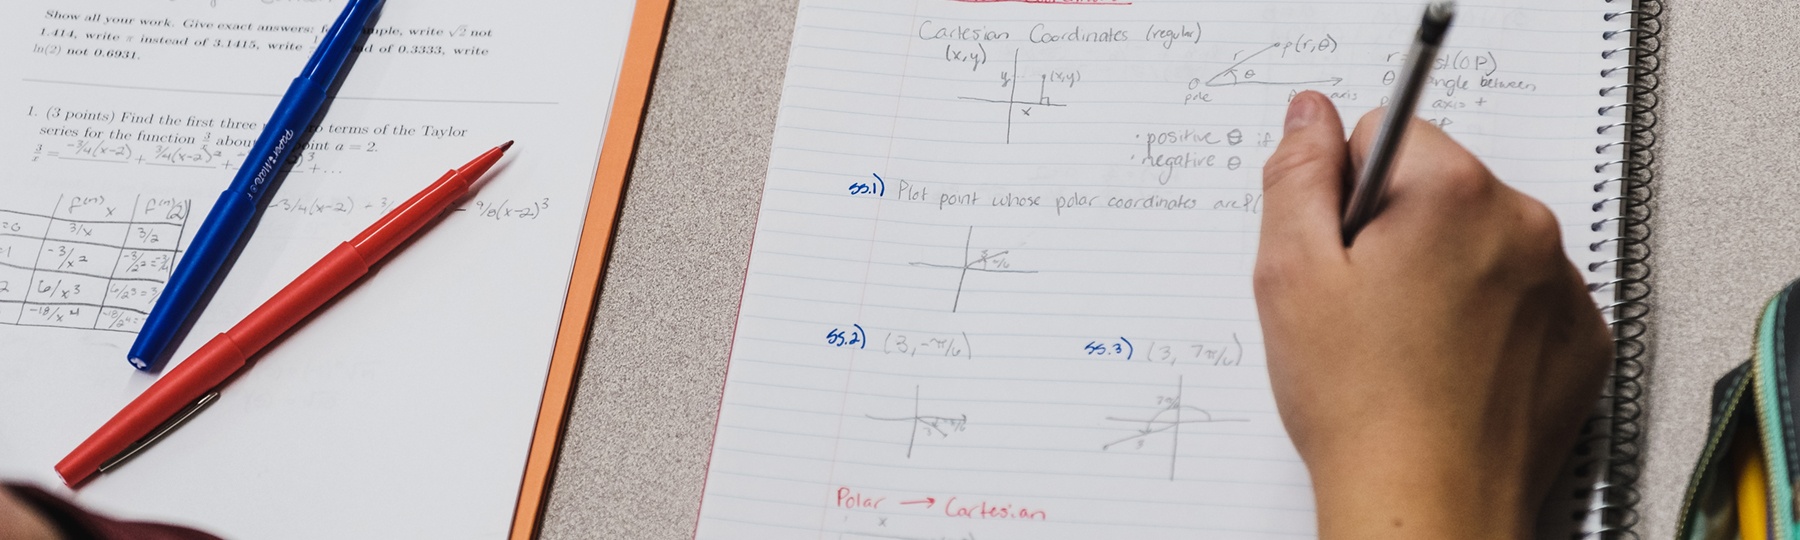 A student works on math problems in a notebook.